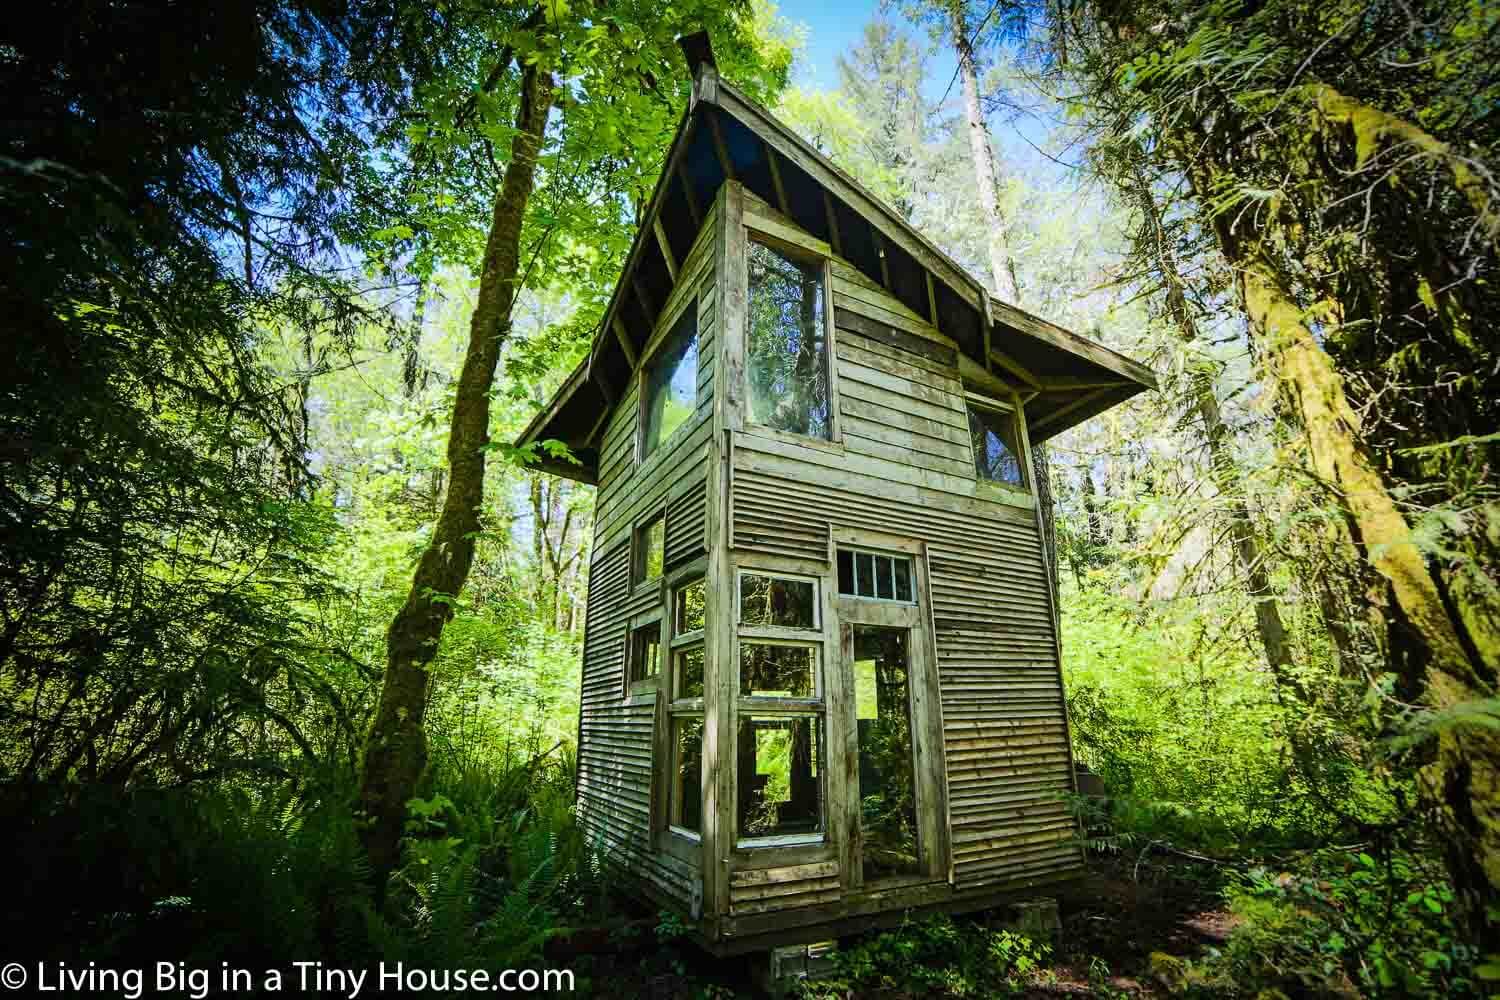 Forest Cabin Built From Salvaged Materials Cost Only $800!